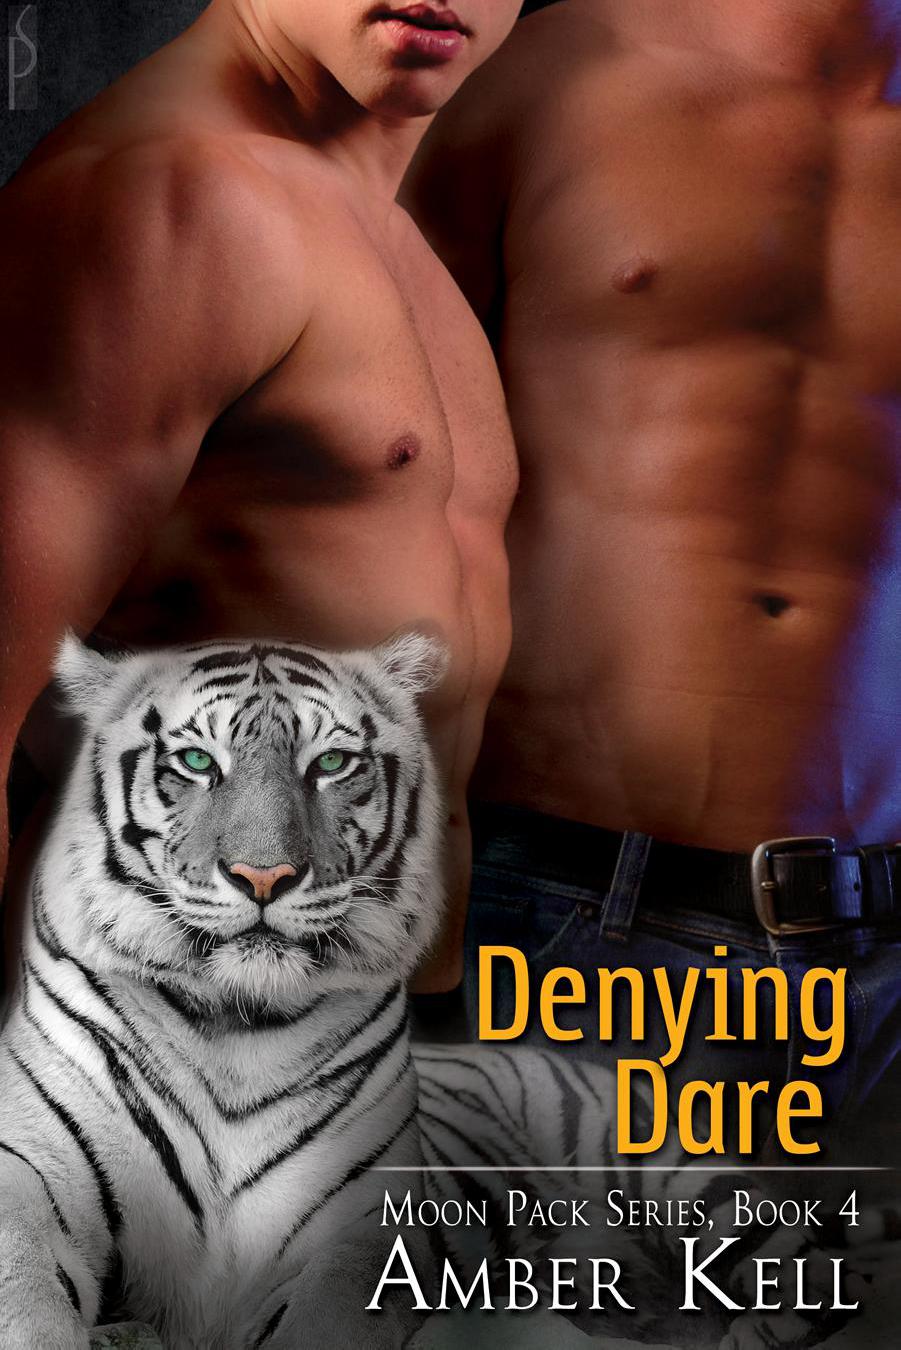 Denying Dare by Amber Kell